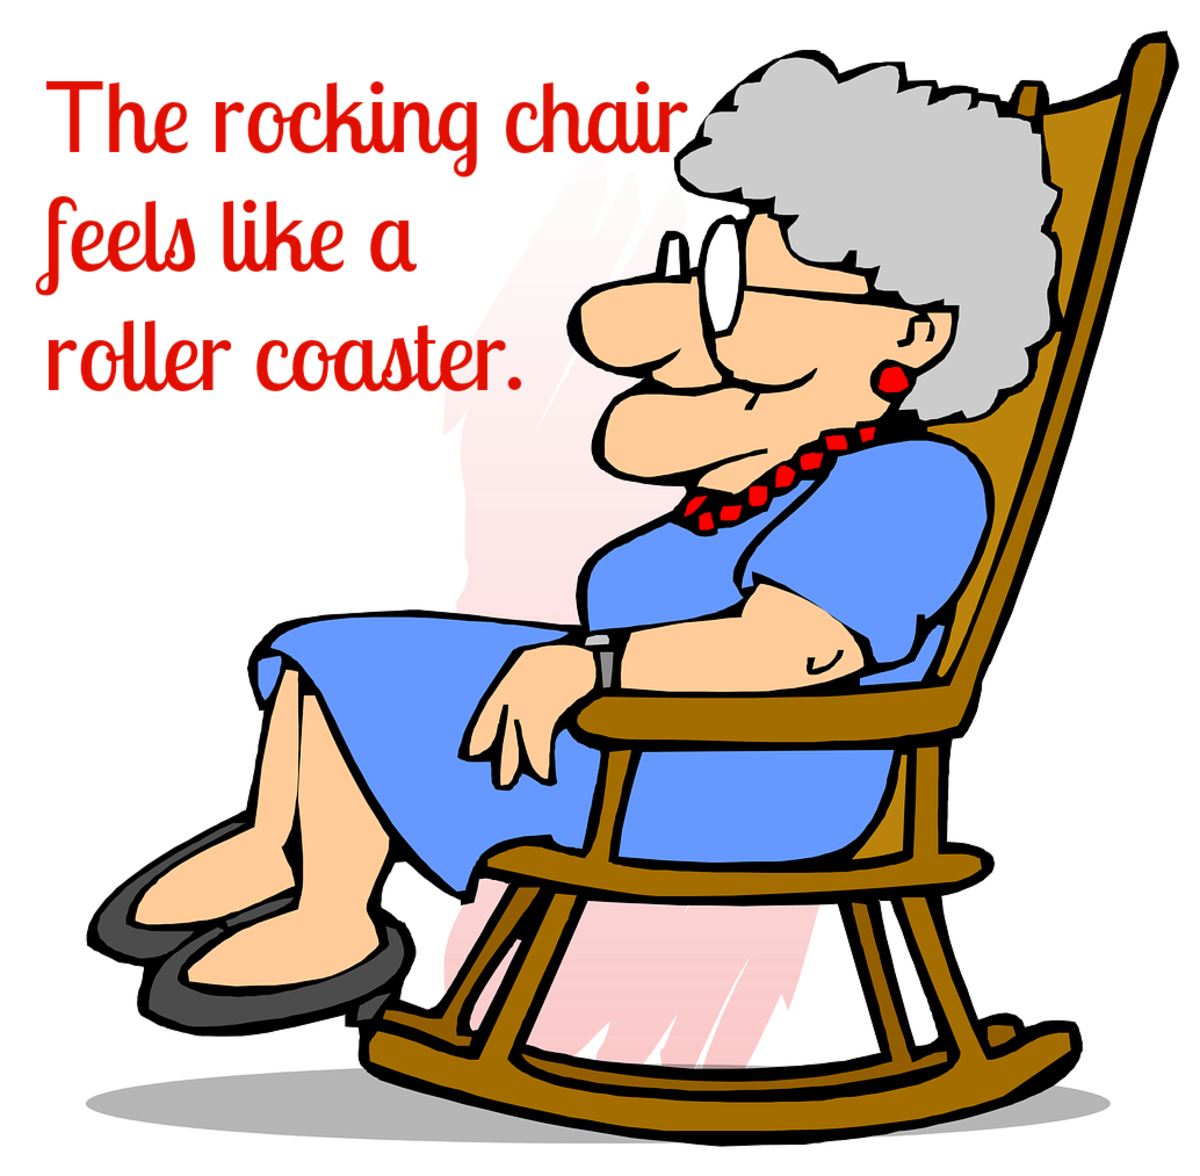 Your rocking chair feels like a roller coaster.